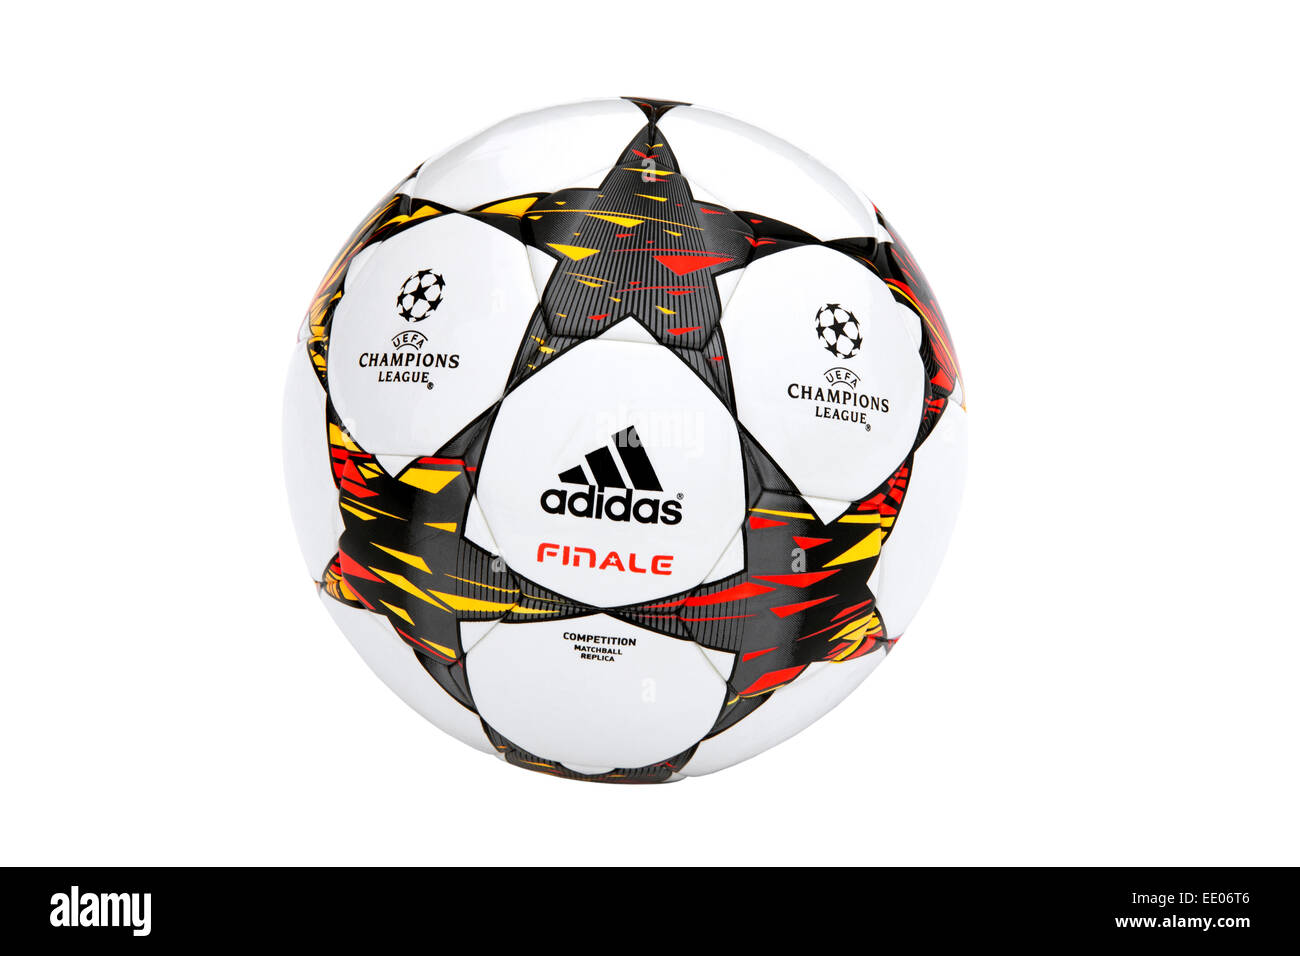 The Adidas Finale 2014-2015 UEFA Champions League Ball isolated on white background Stock Photo